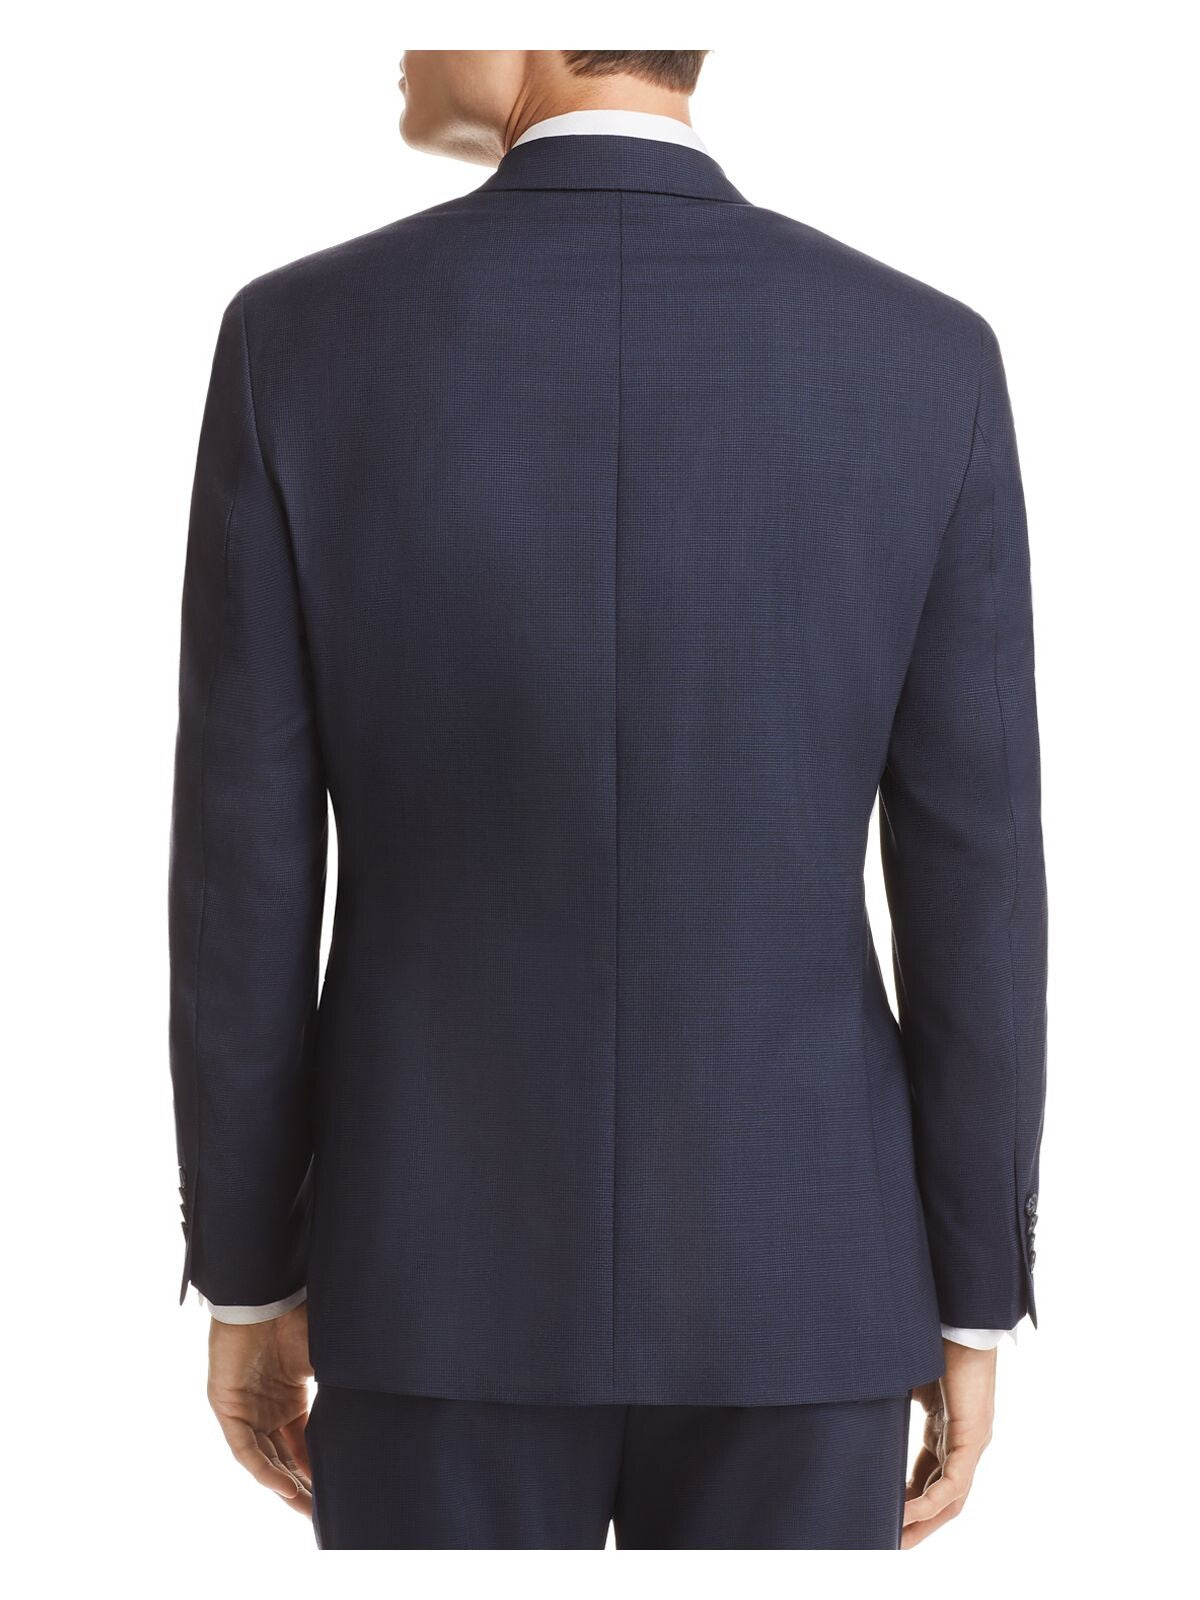 MICHAEL KORS Mens Navy Single Breasted, Stretch, Classic Fit Wool Blend Suit Separate Blazer Jacket 46R